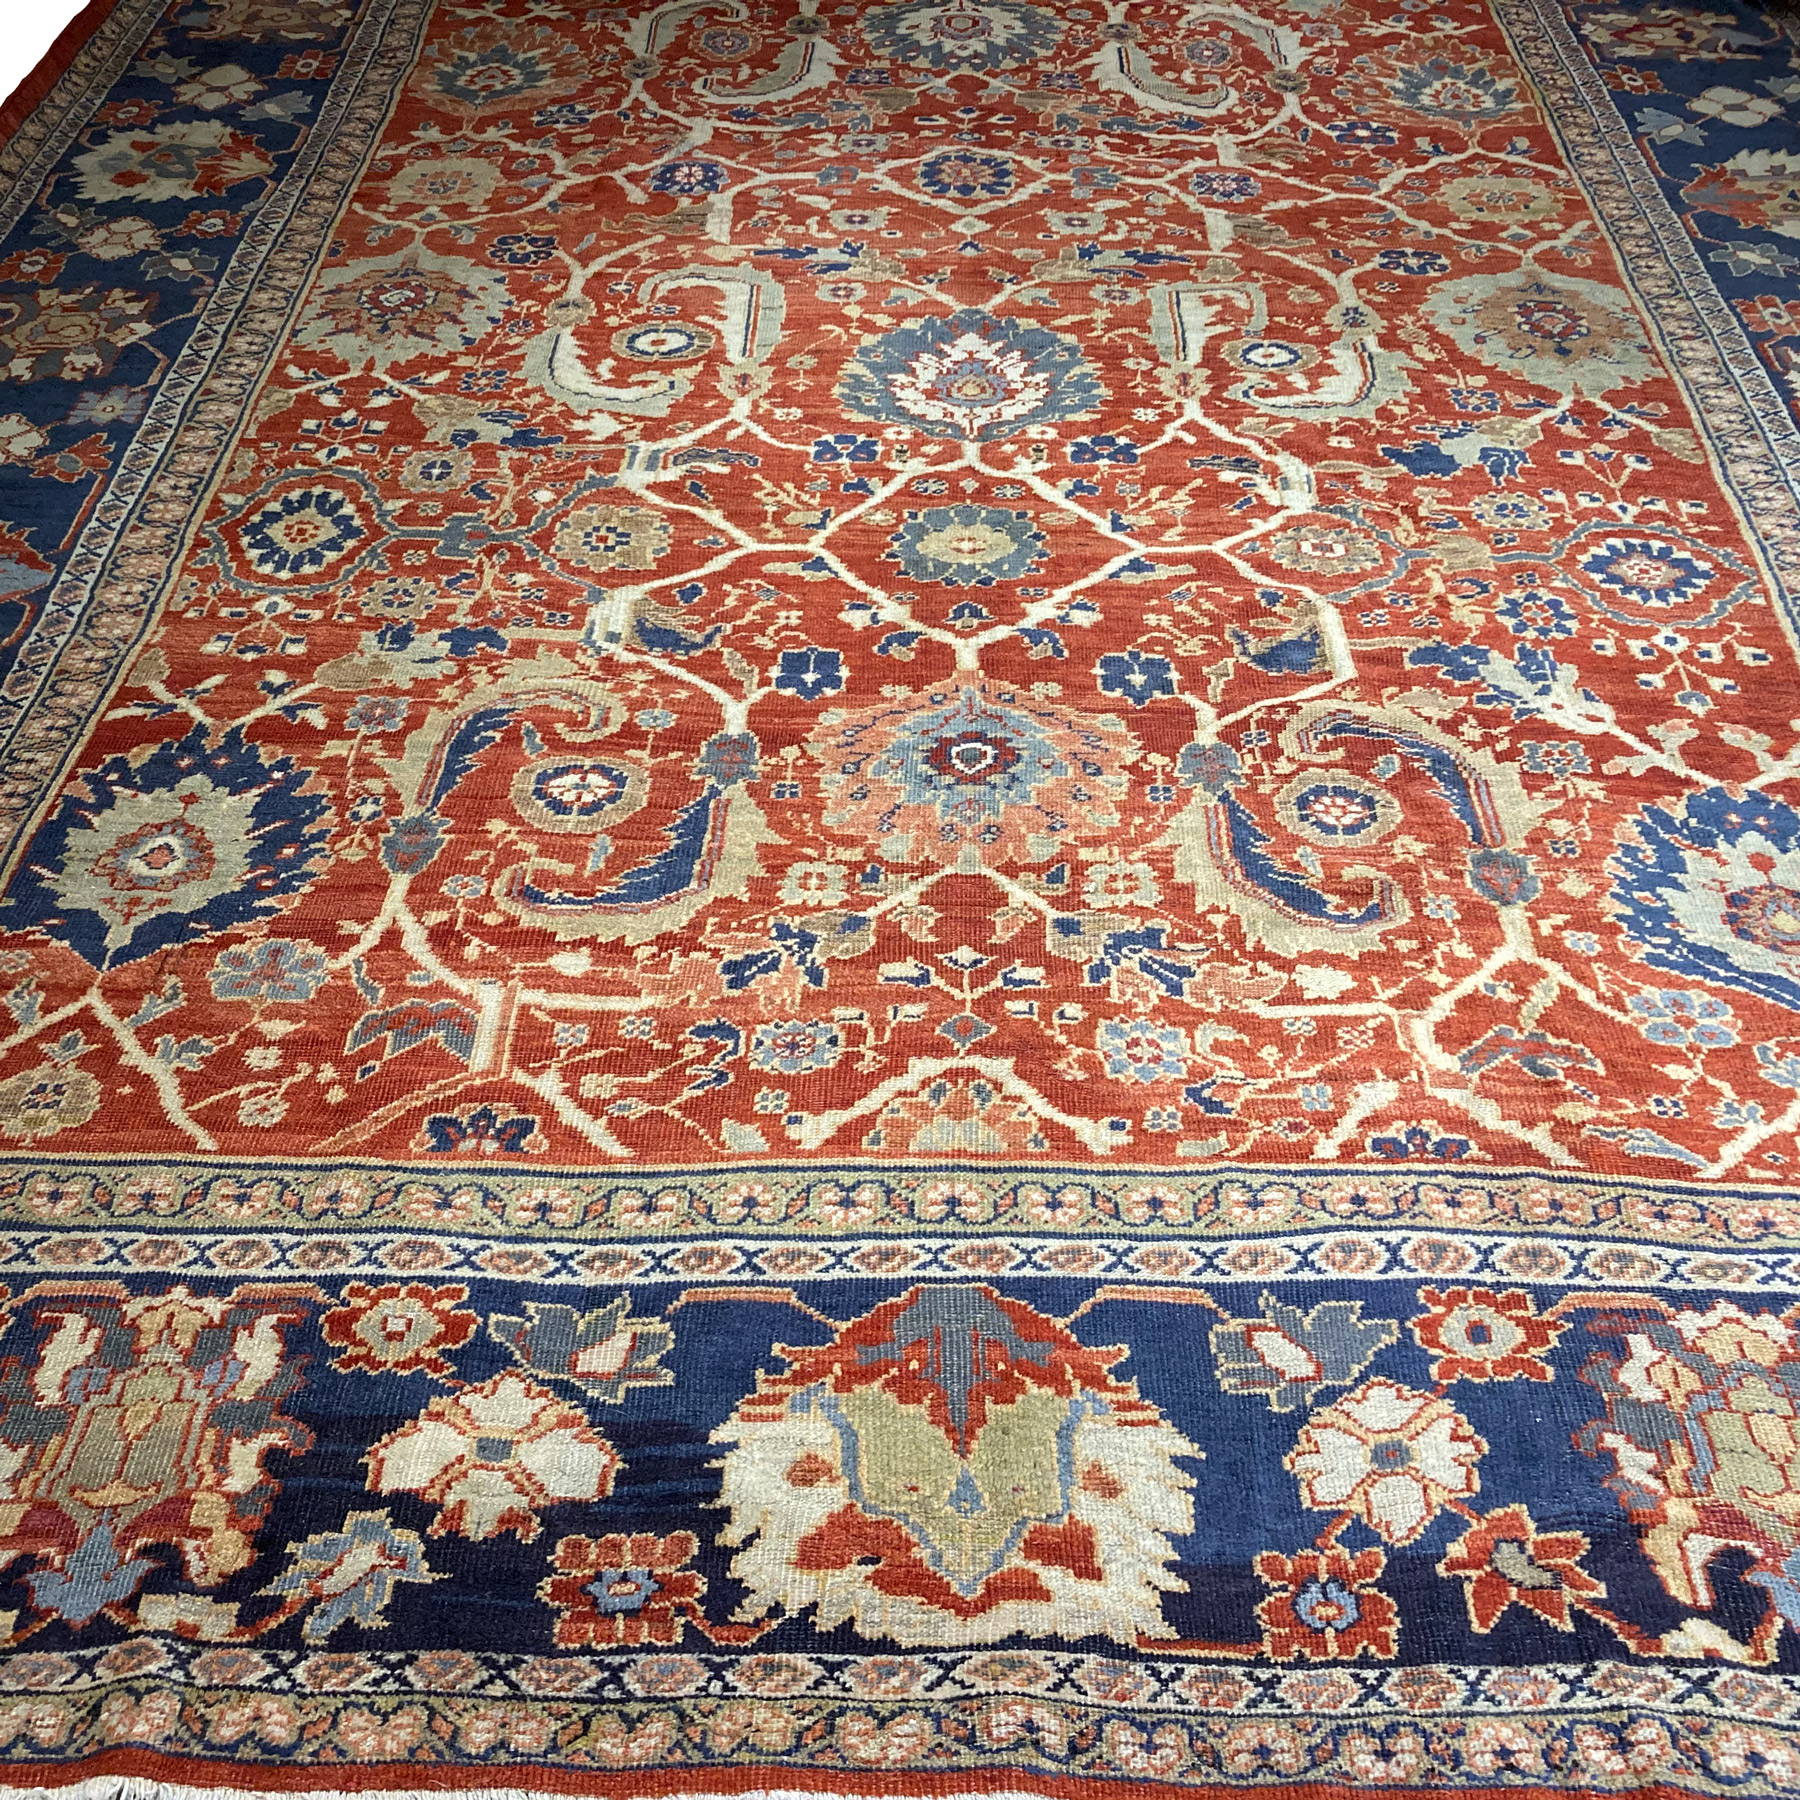 Douglas Stock Gallery features a selection of antique Oriental rugs and room size antique decorative carpets, Boston,MA area. An oversize antique Mahal carpet probably commissioned by the Anglo-Swiss firm Ziegler & Co. in central Persia's Sultanabad province, circa 1900. The brick color field is decorated with large palmettes and leaves and framed by a navy blue border with large palmettes and ancillary stylized floral motifs. Antique carpets Boston, Brookline, Weston, Newton, Wellesley, Needhma, South Natick, Boston North Shore, Boston South Shore, Boston Metrowest antique Oriental rugs.